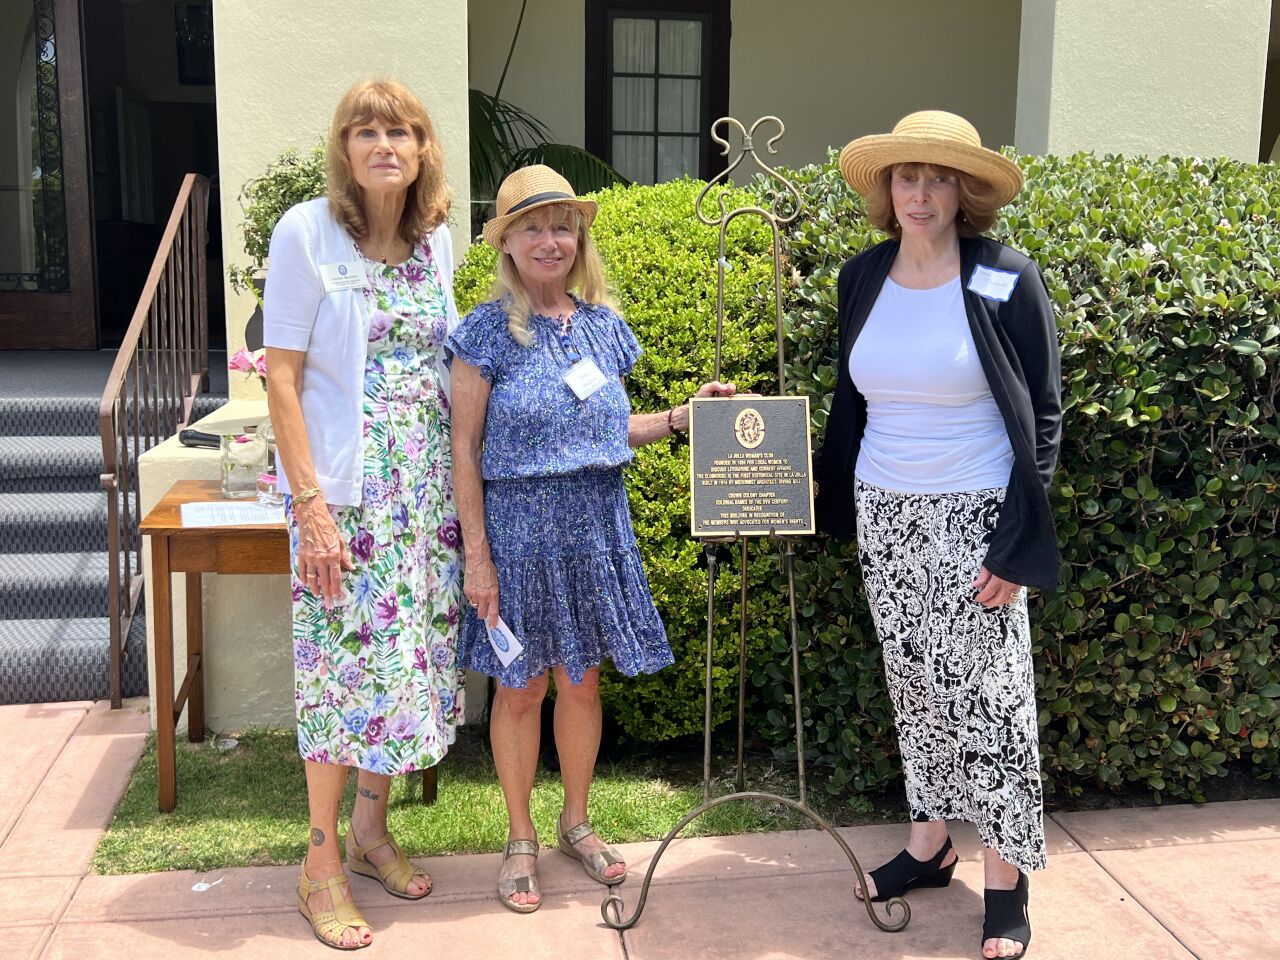 La Jolla Woman's Club President Tona Macken (center) is presented a plaque by Carrie Beinert (left) and Pam Theobald of the Crown Colony chapter of the National Society Colonial Dames XVII Century.